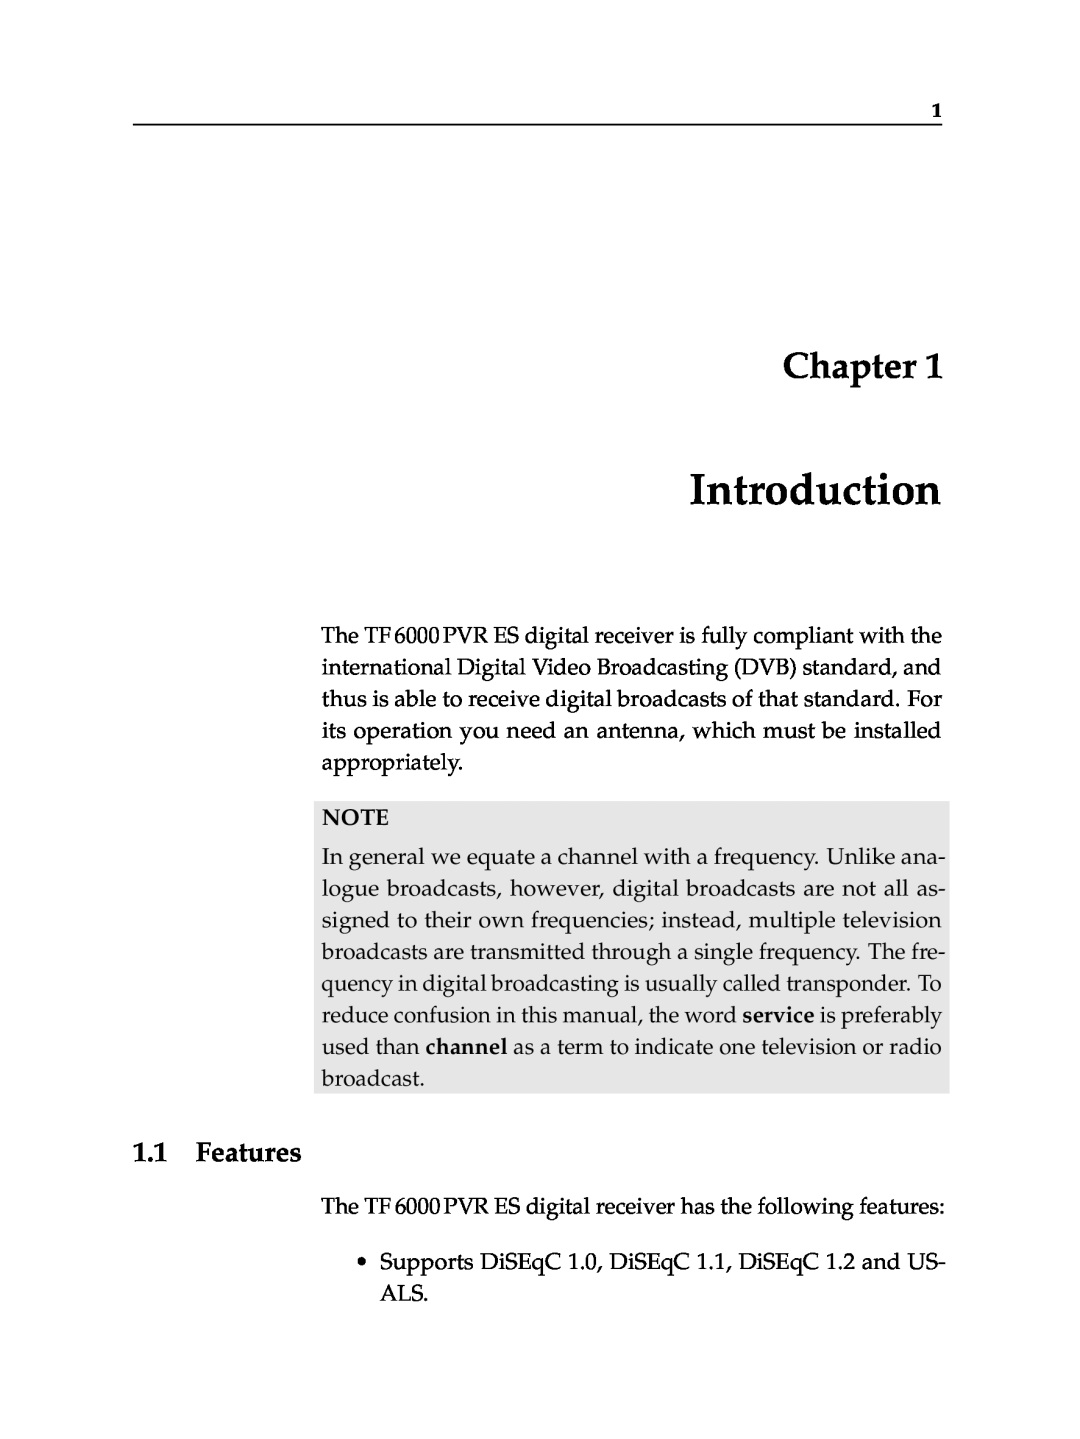 Topfield TF 6000 PVR ES manual Introduction, Chapter, Features 